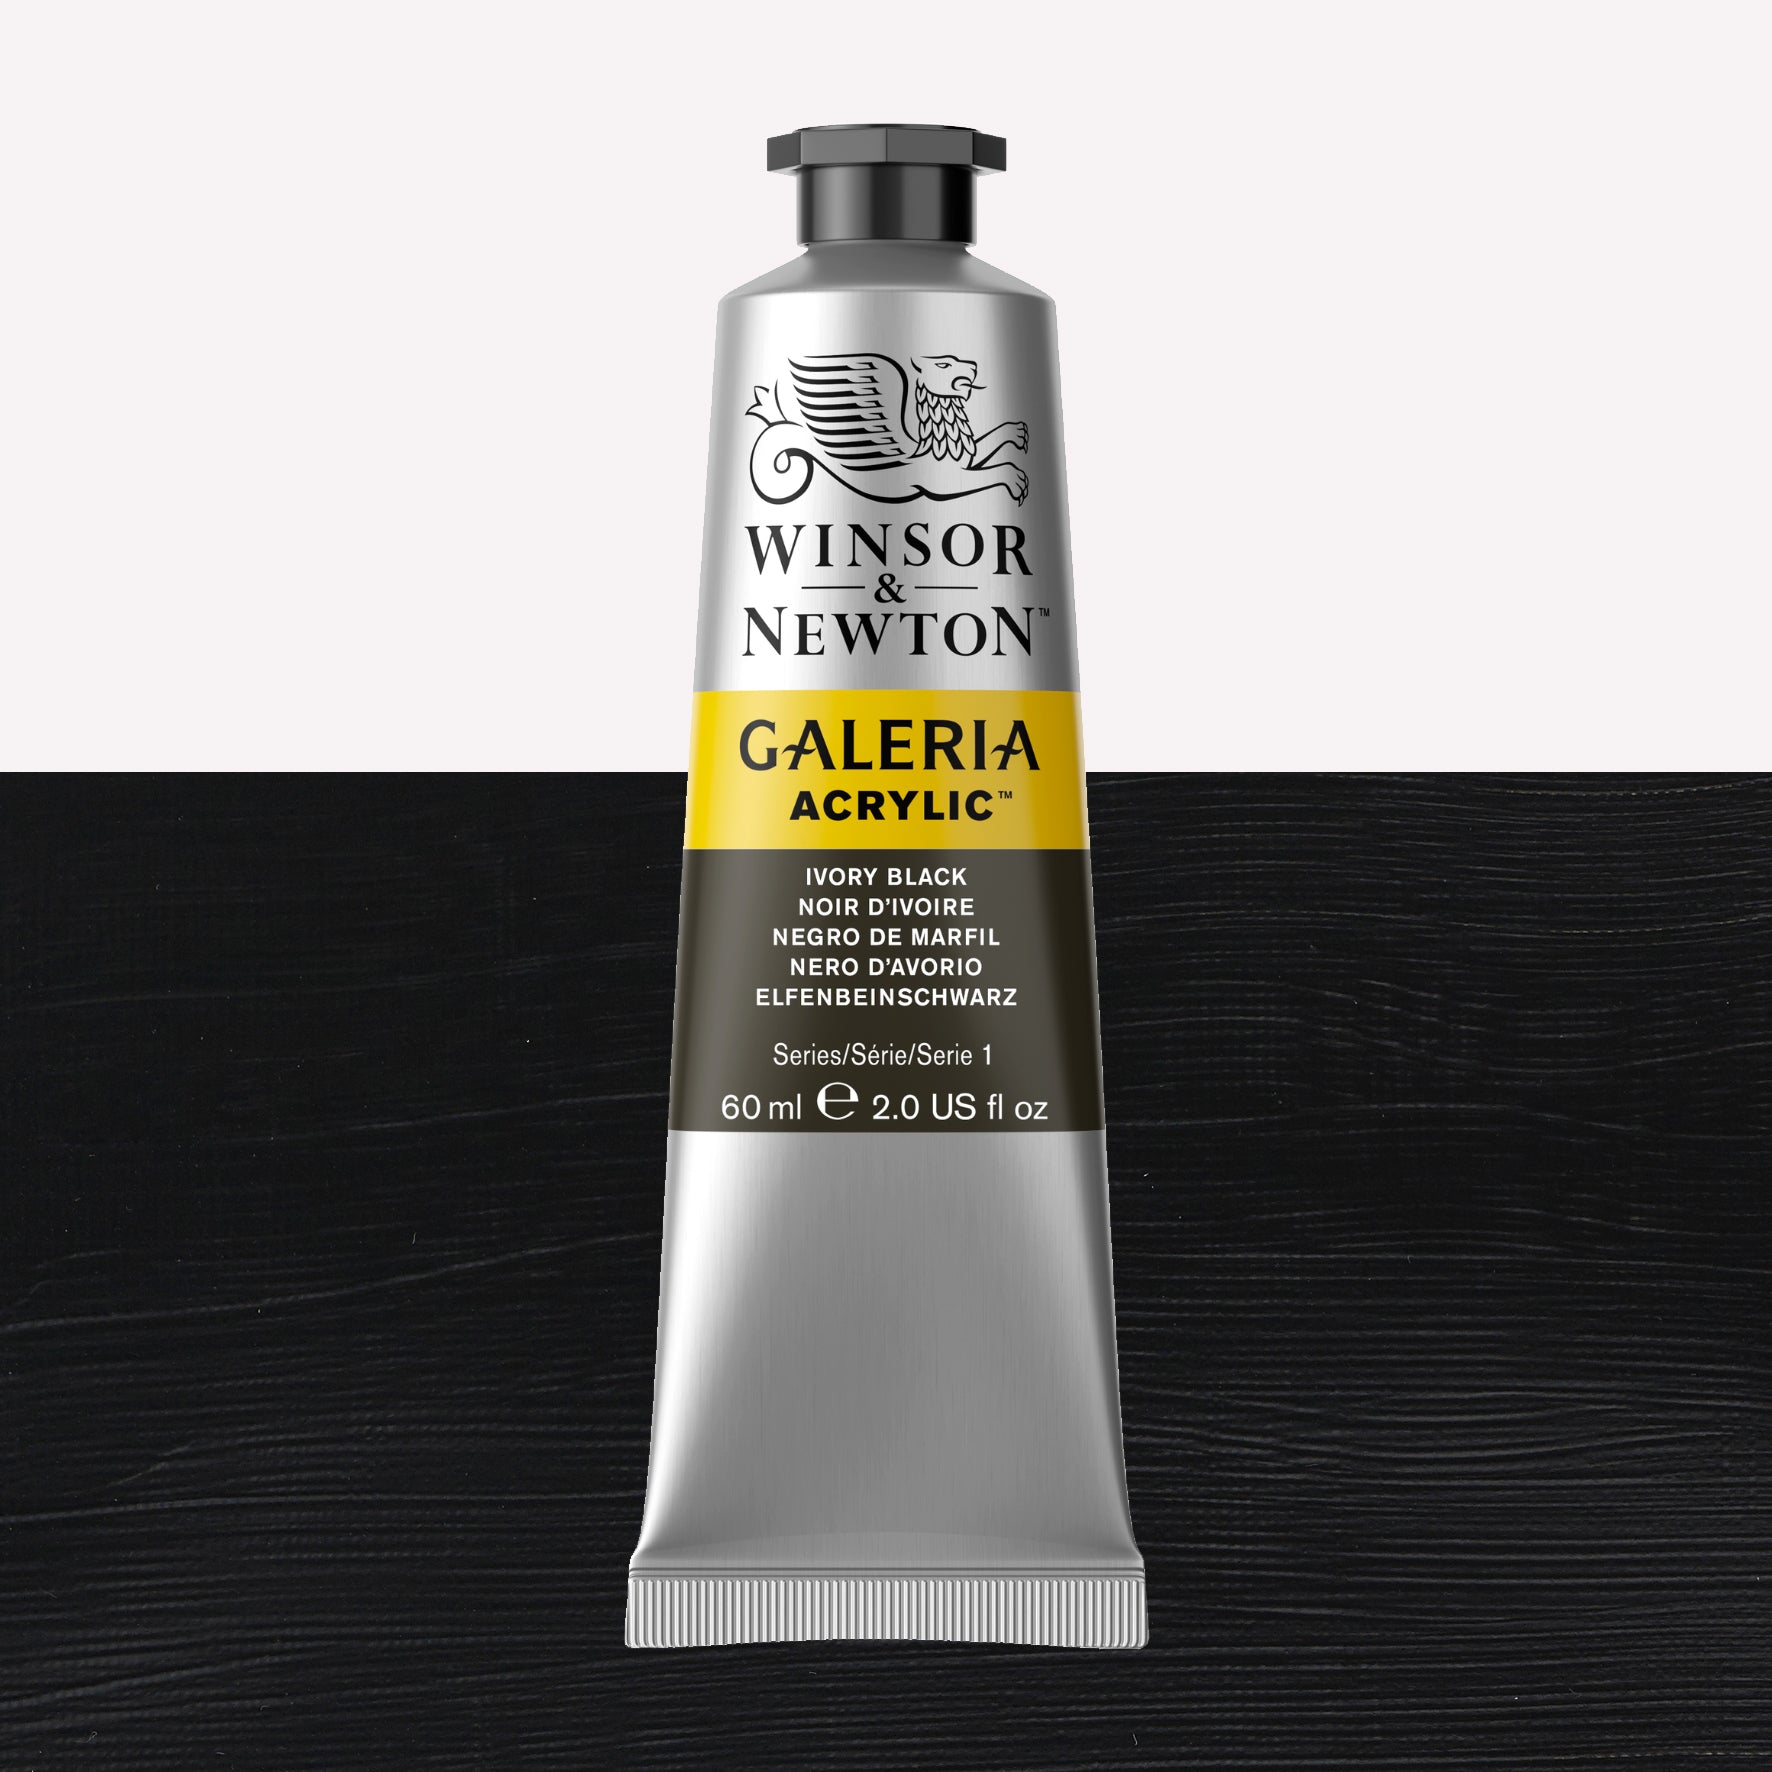 A 60ml tube of vibrant Galeria Acrylic paint in the shade Ivory Black. This professional-quality paint is packaged in a silver tube with a black lid. Made by Winsor and Newton.